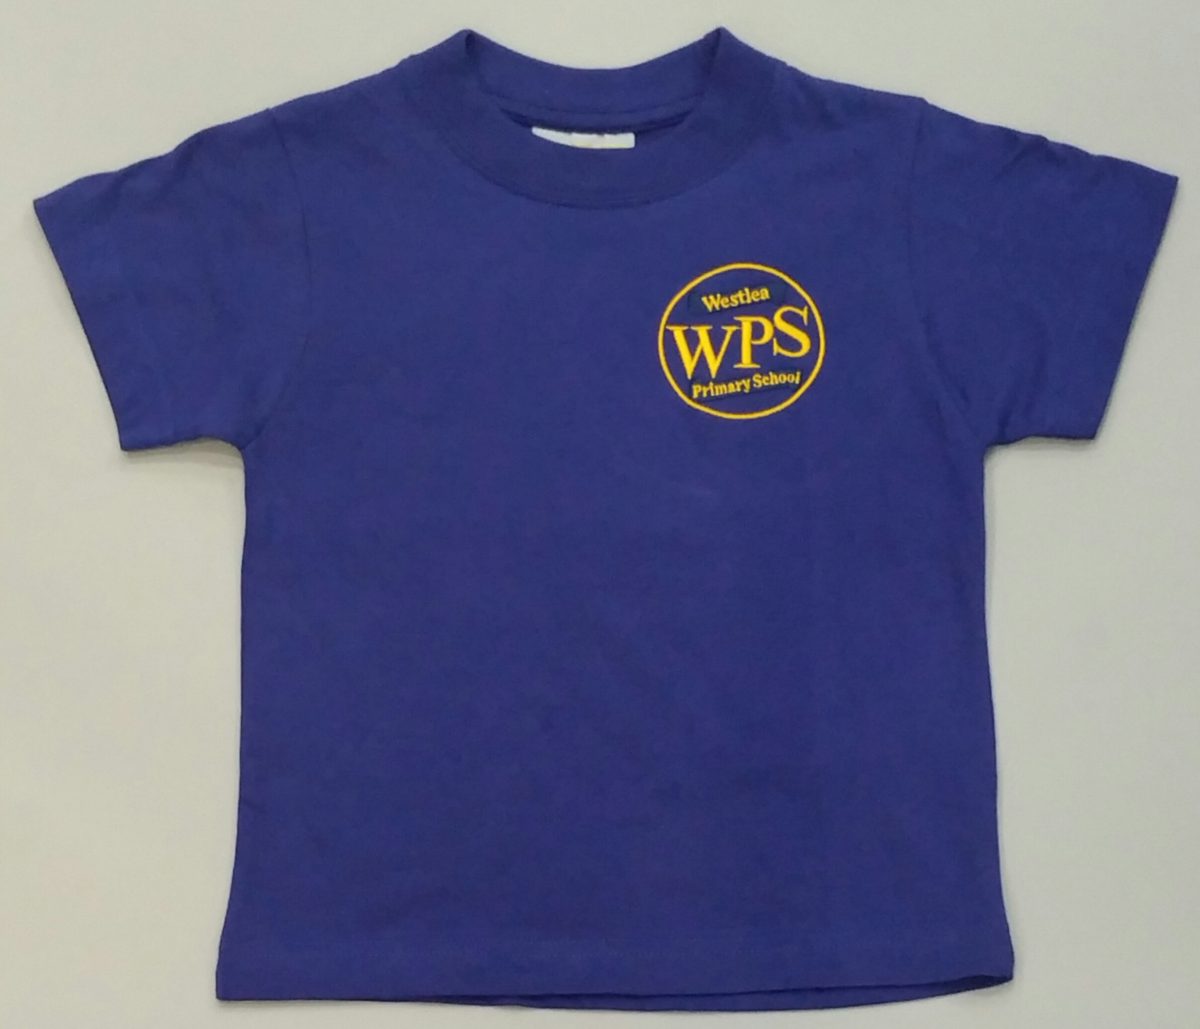 DEEP ROYAL BLUE P.E. ROUNDNECK T-SHIRT with embroidered school logo